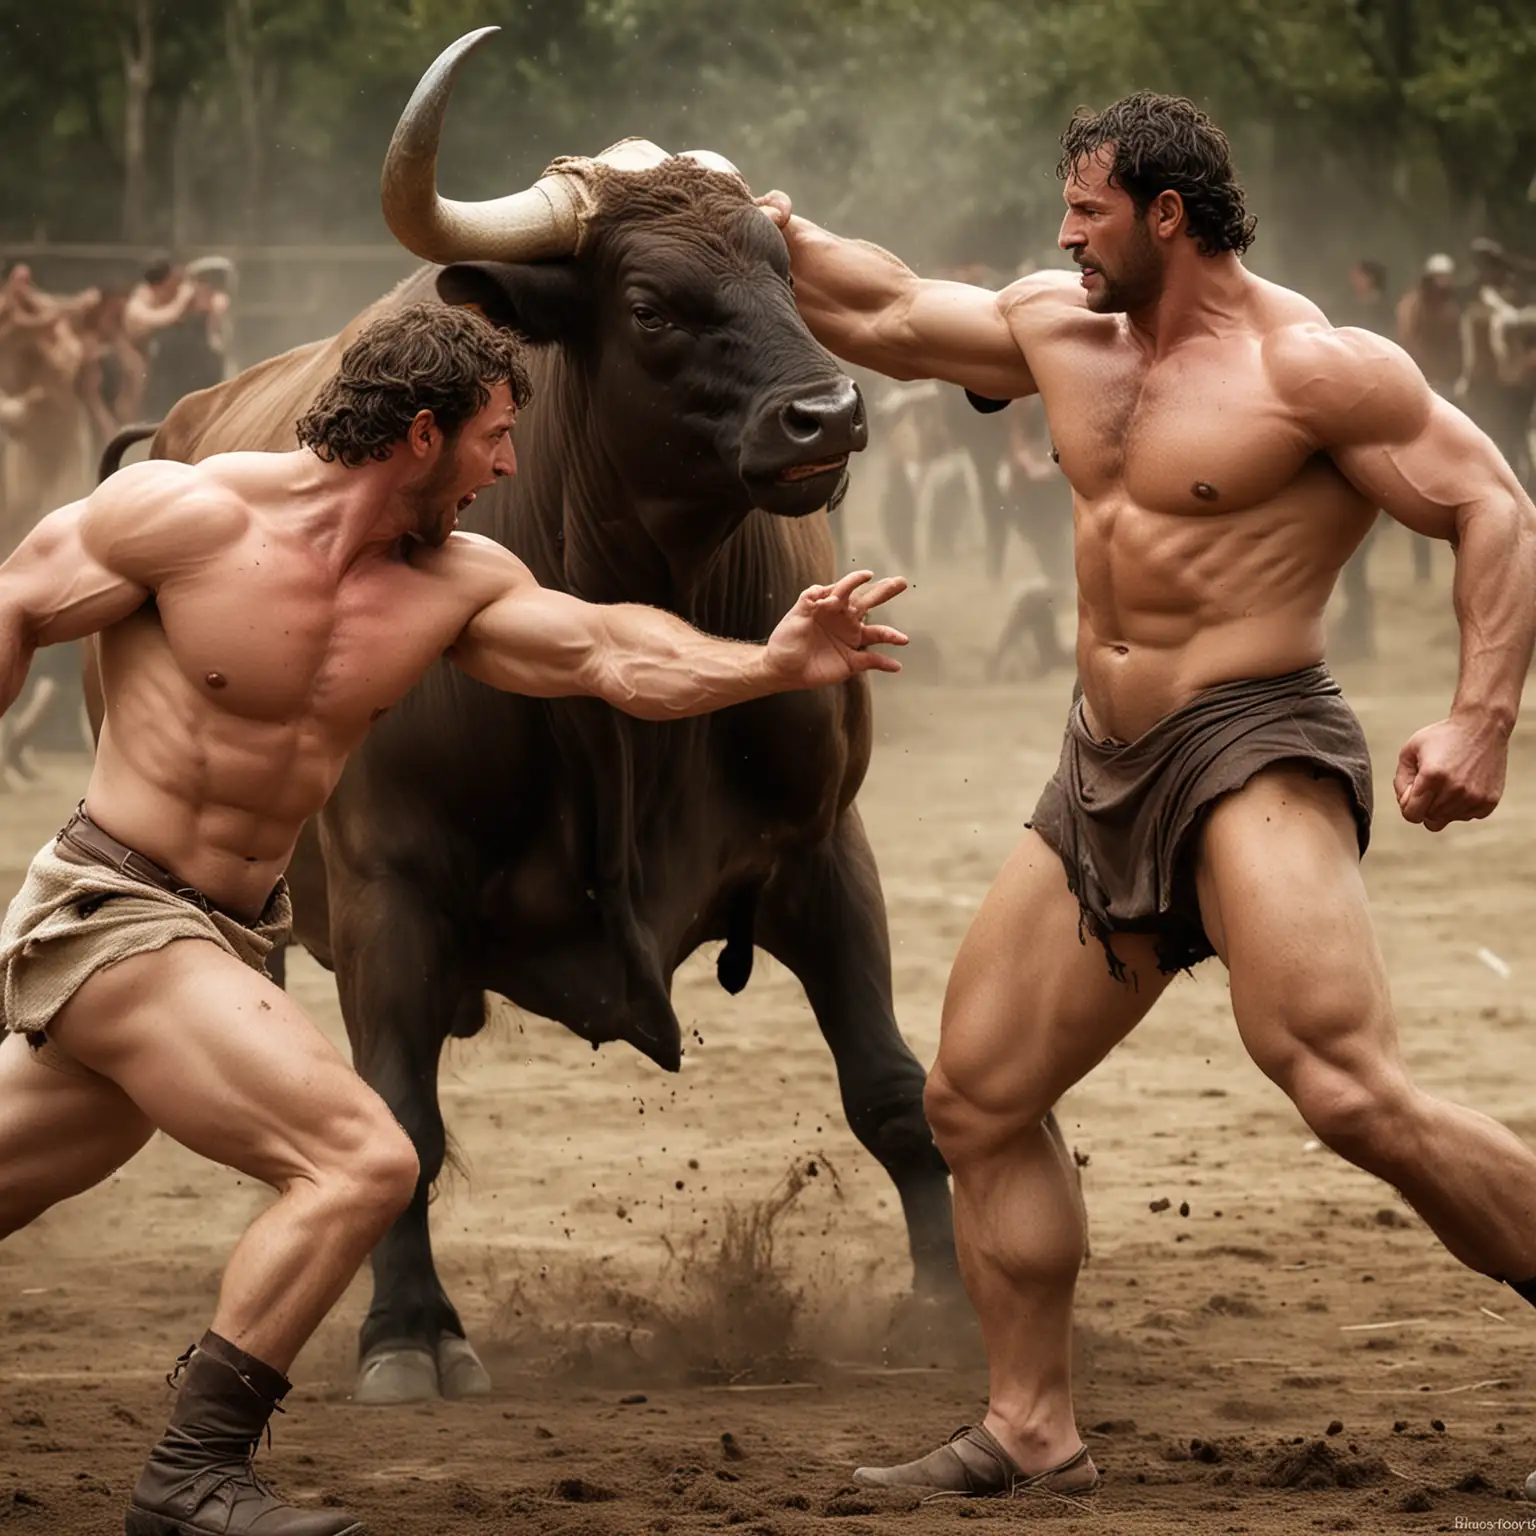 Hercules Battling a Bull in Epic Mythical Struggle